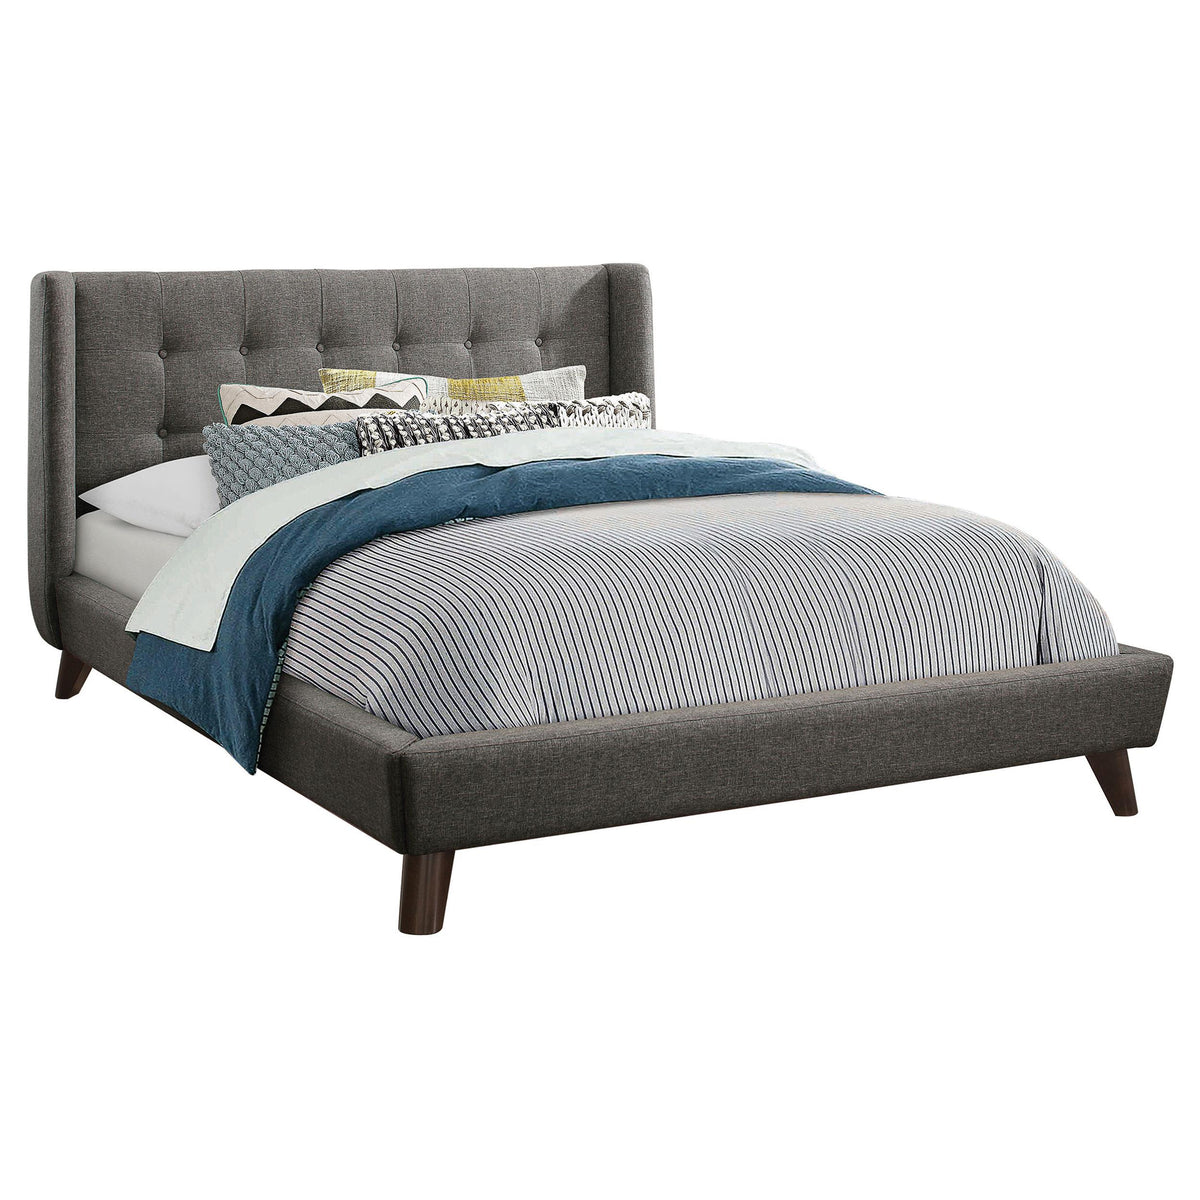 Carrington Button Tufted Eastern King Bed Grey  Half Price Furniture